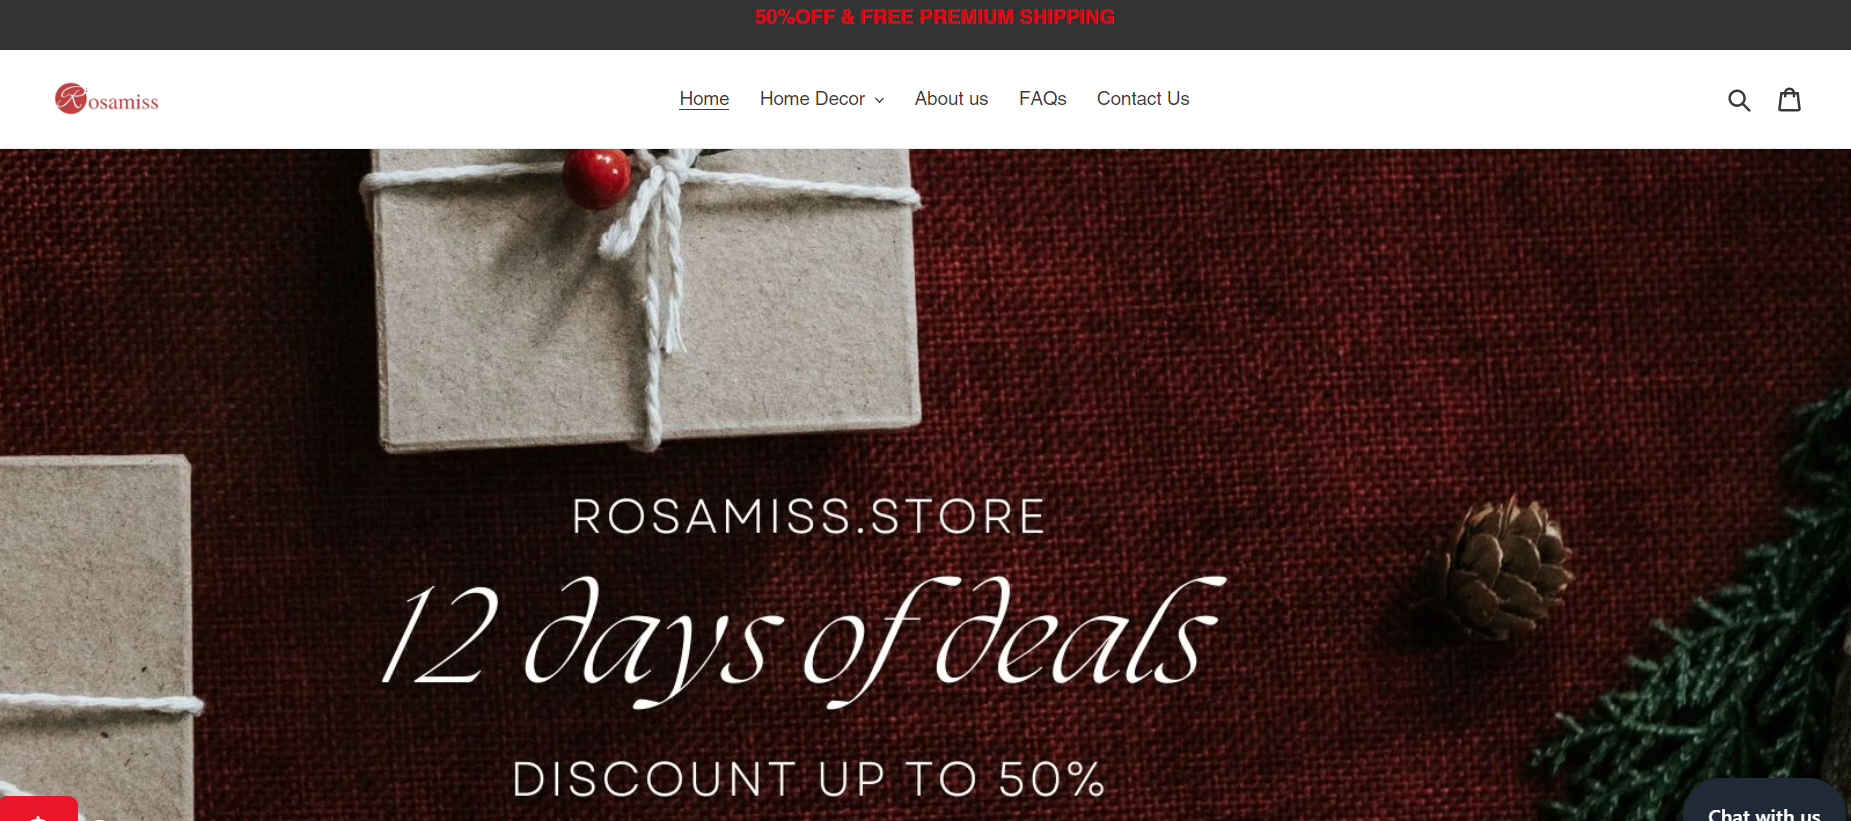 home decors luxurious and fancy you can buy from rosamiss store